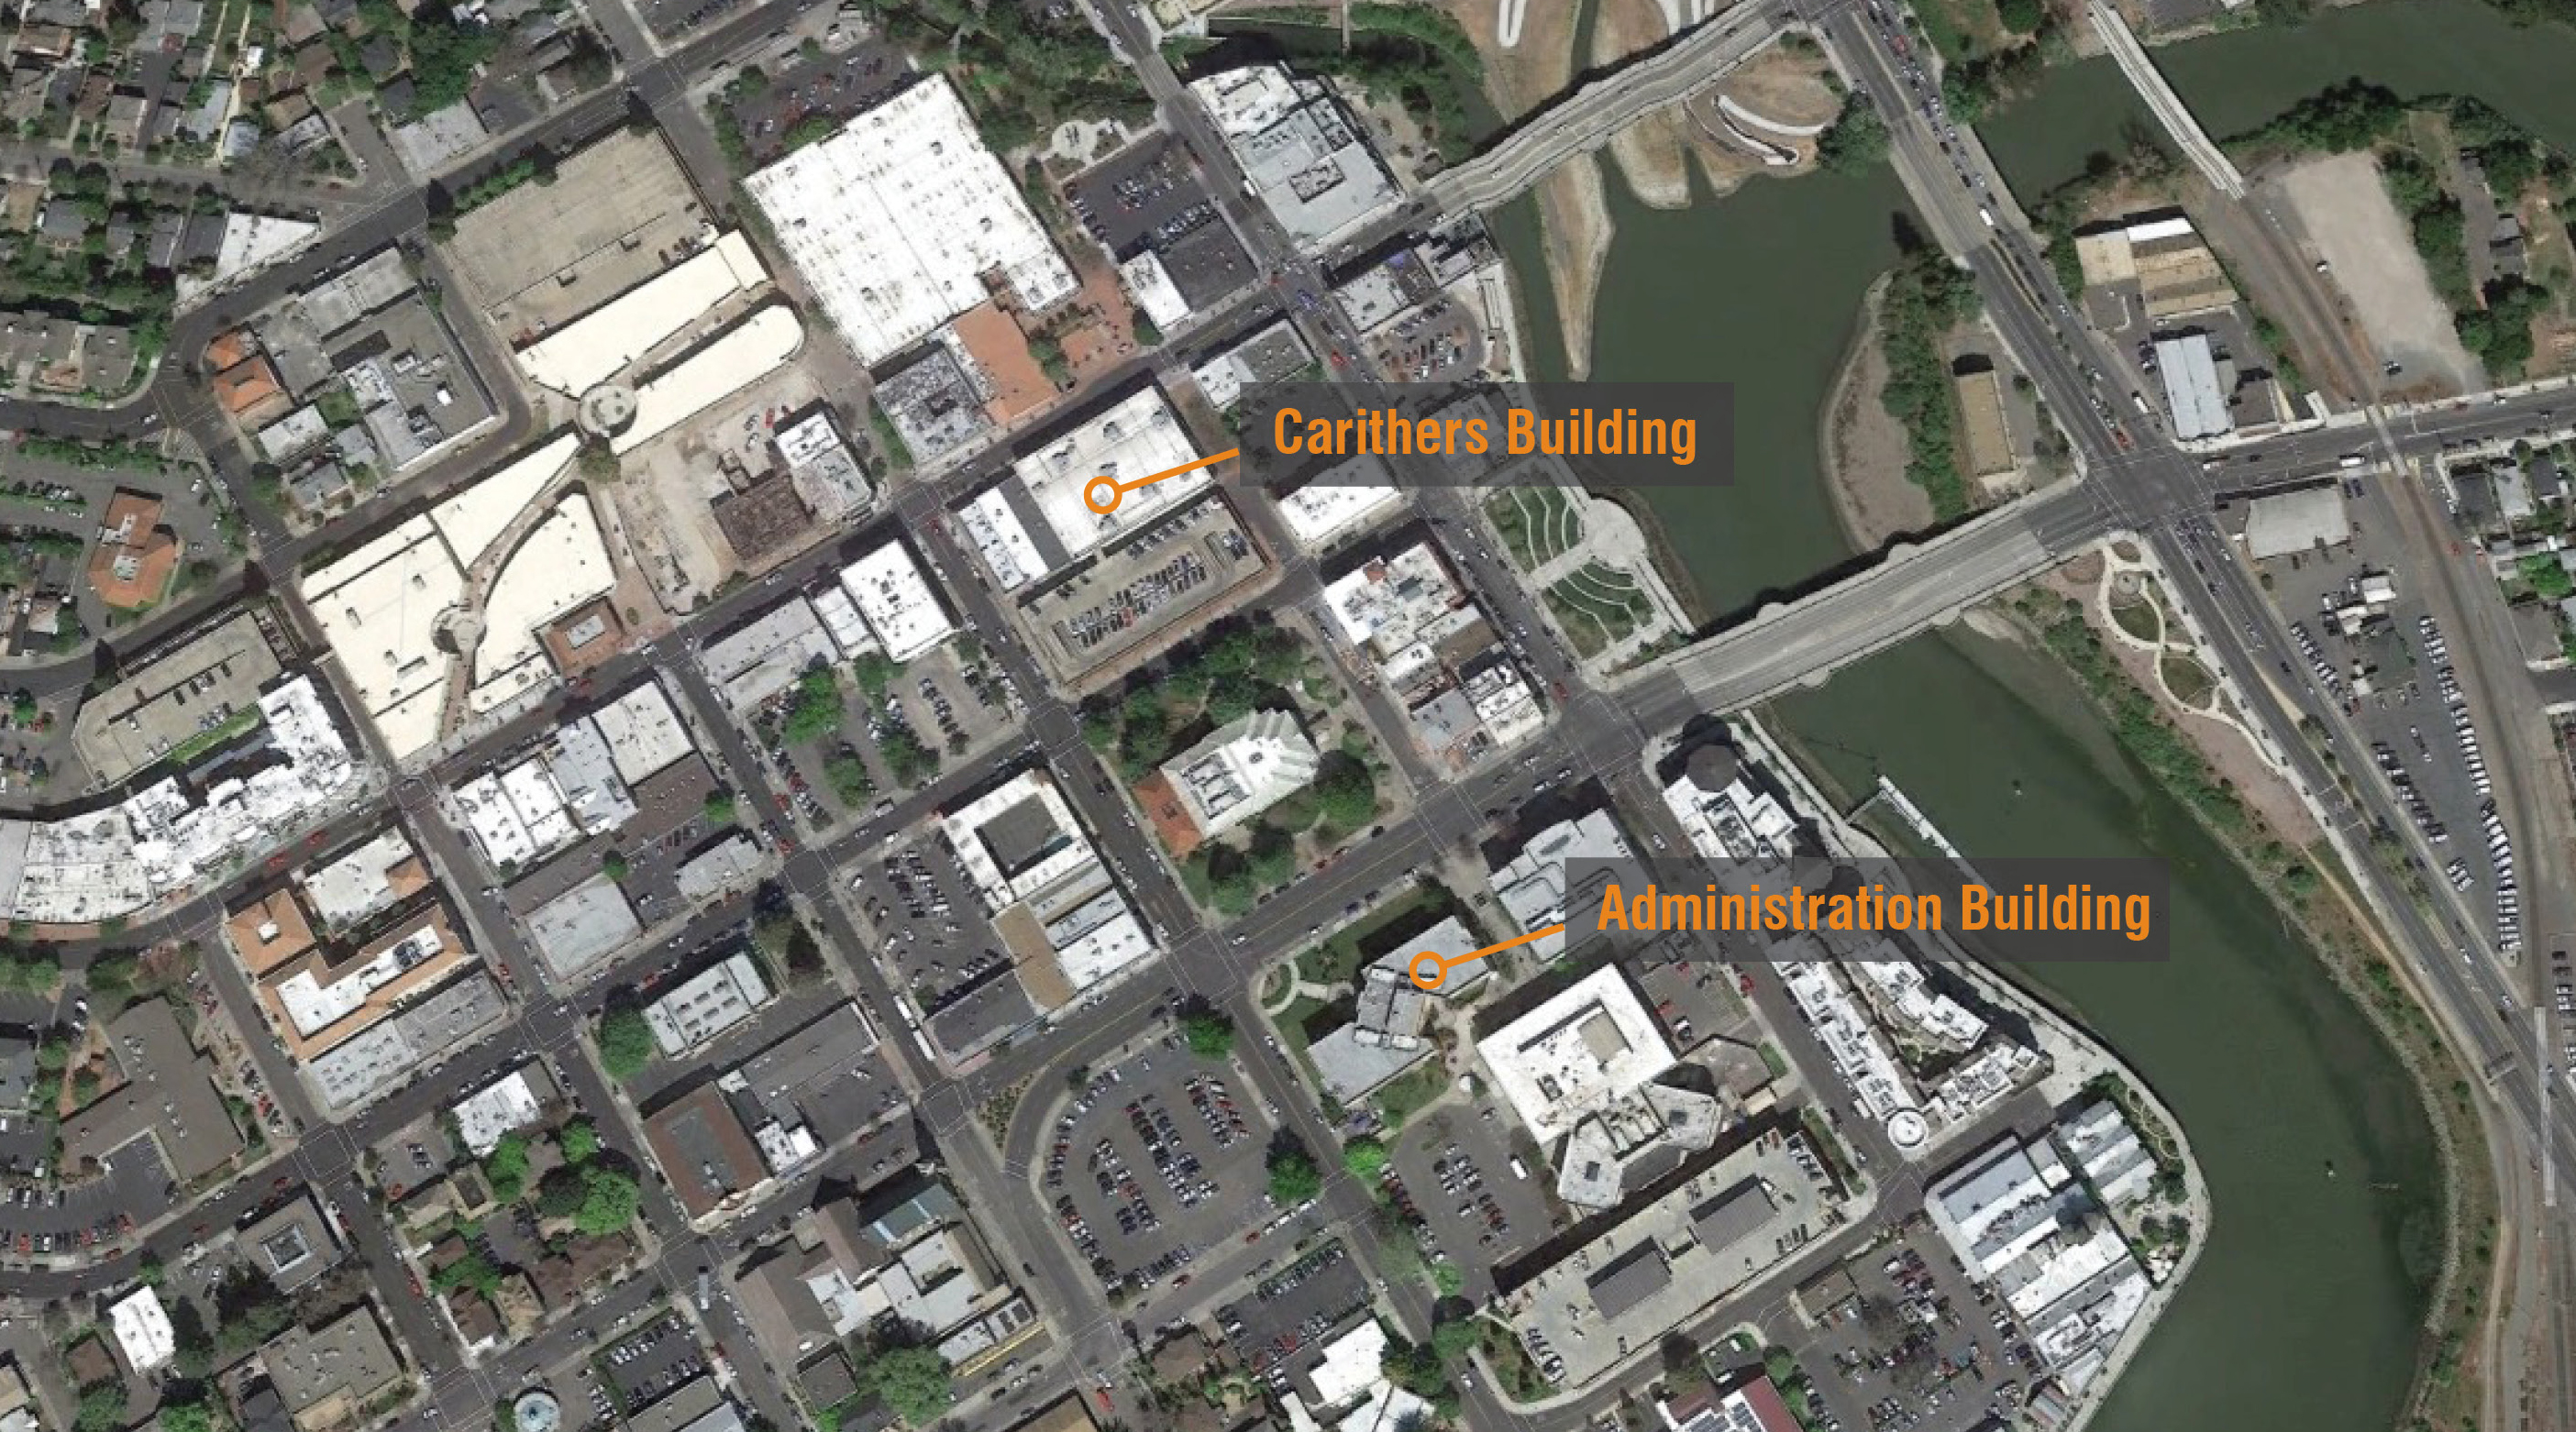 Downtown Napa, earthquake damaged buildings, County of Napa, Carithers Building, Main Administration Building